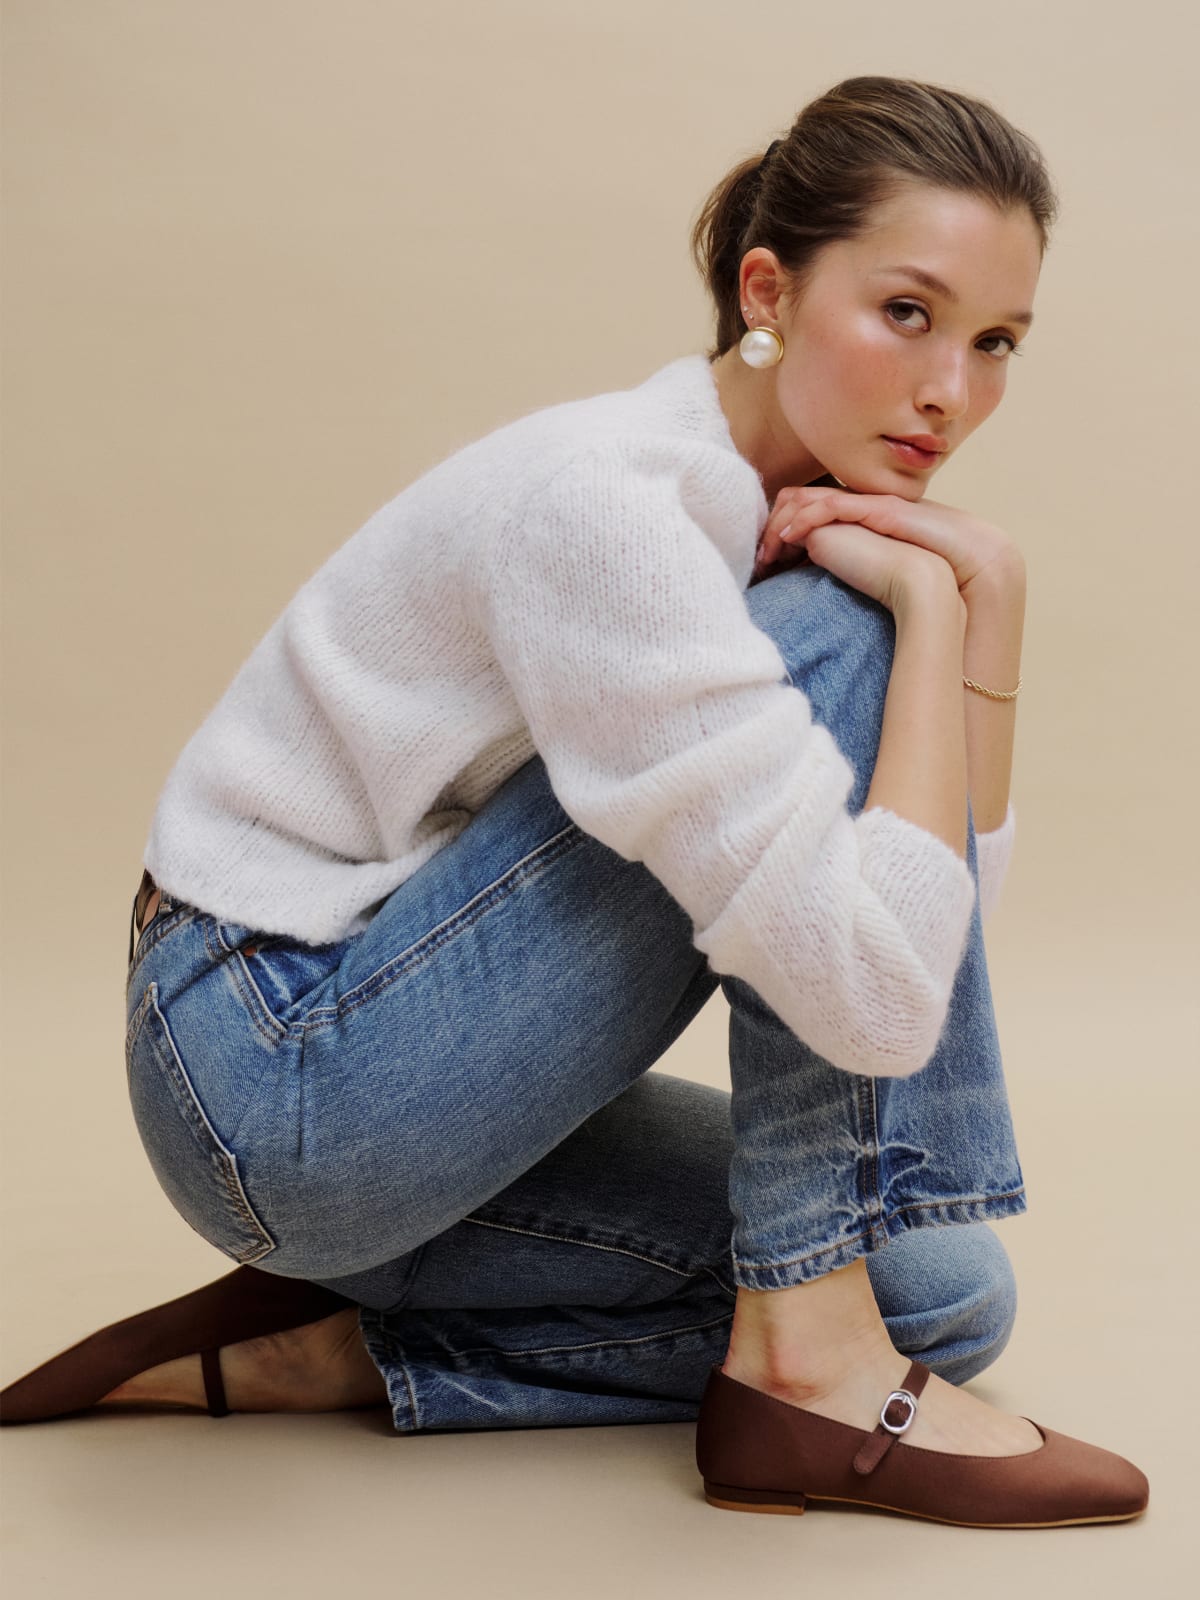 A young woman in blue jeans and a white sweater crouches, wearing brown flats and large pearl earrings, looking at the camera with a neutral expression.